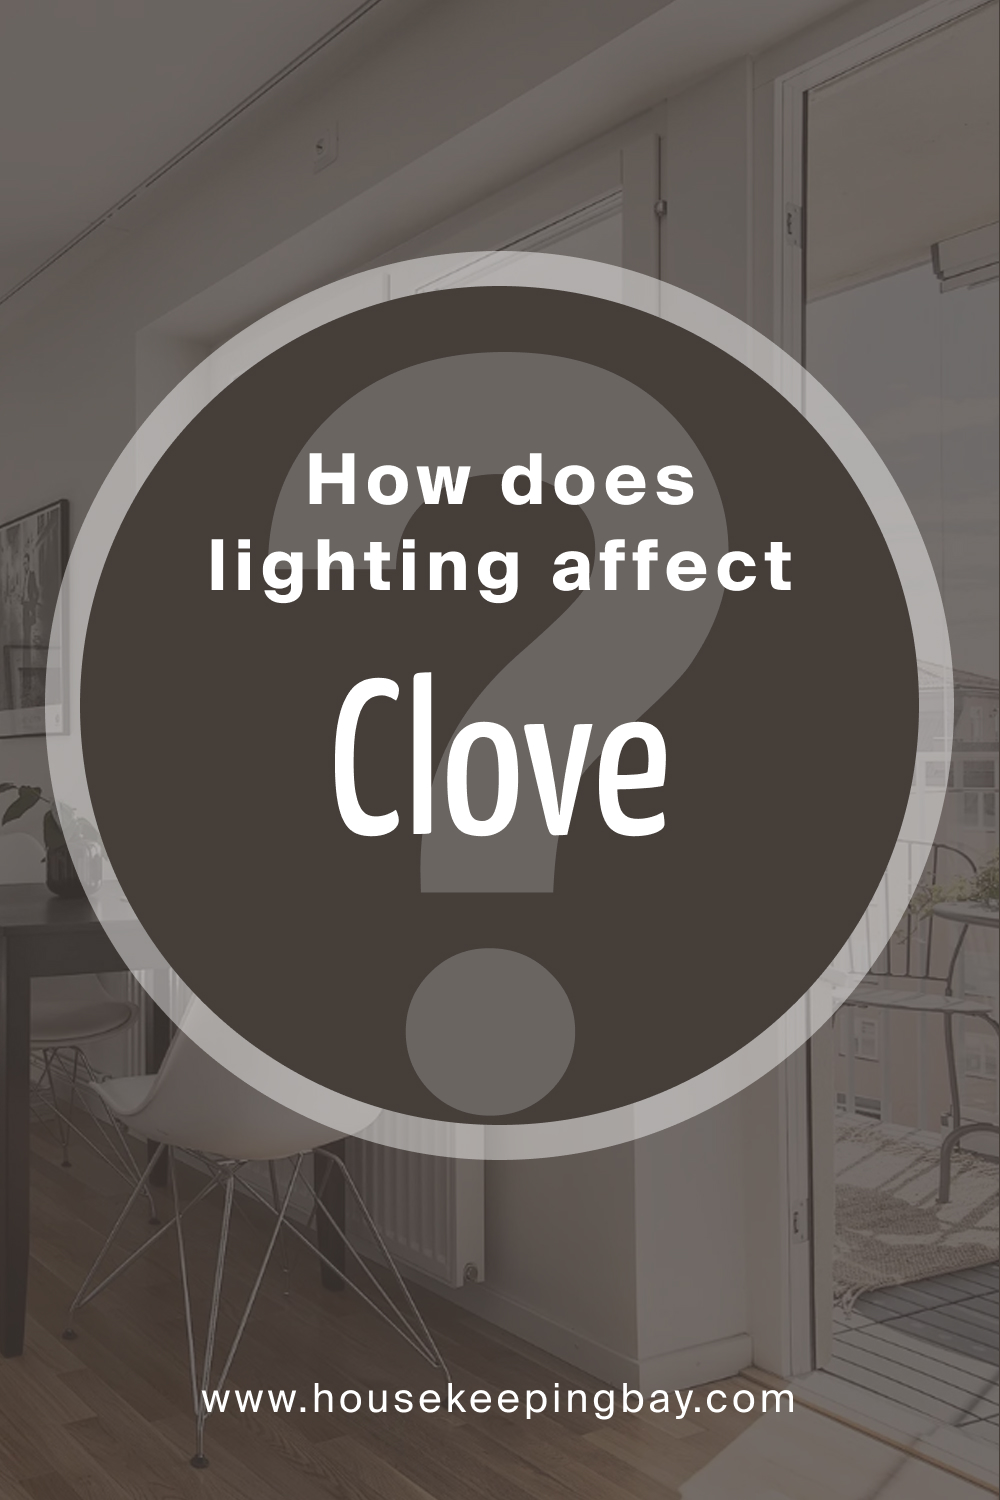 How does lighting affect SW 9605 Clove